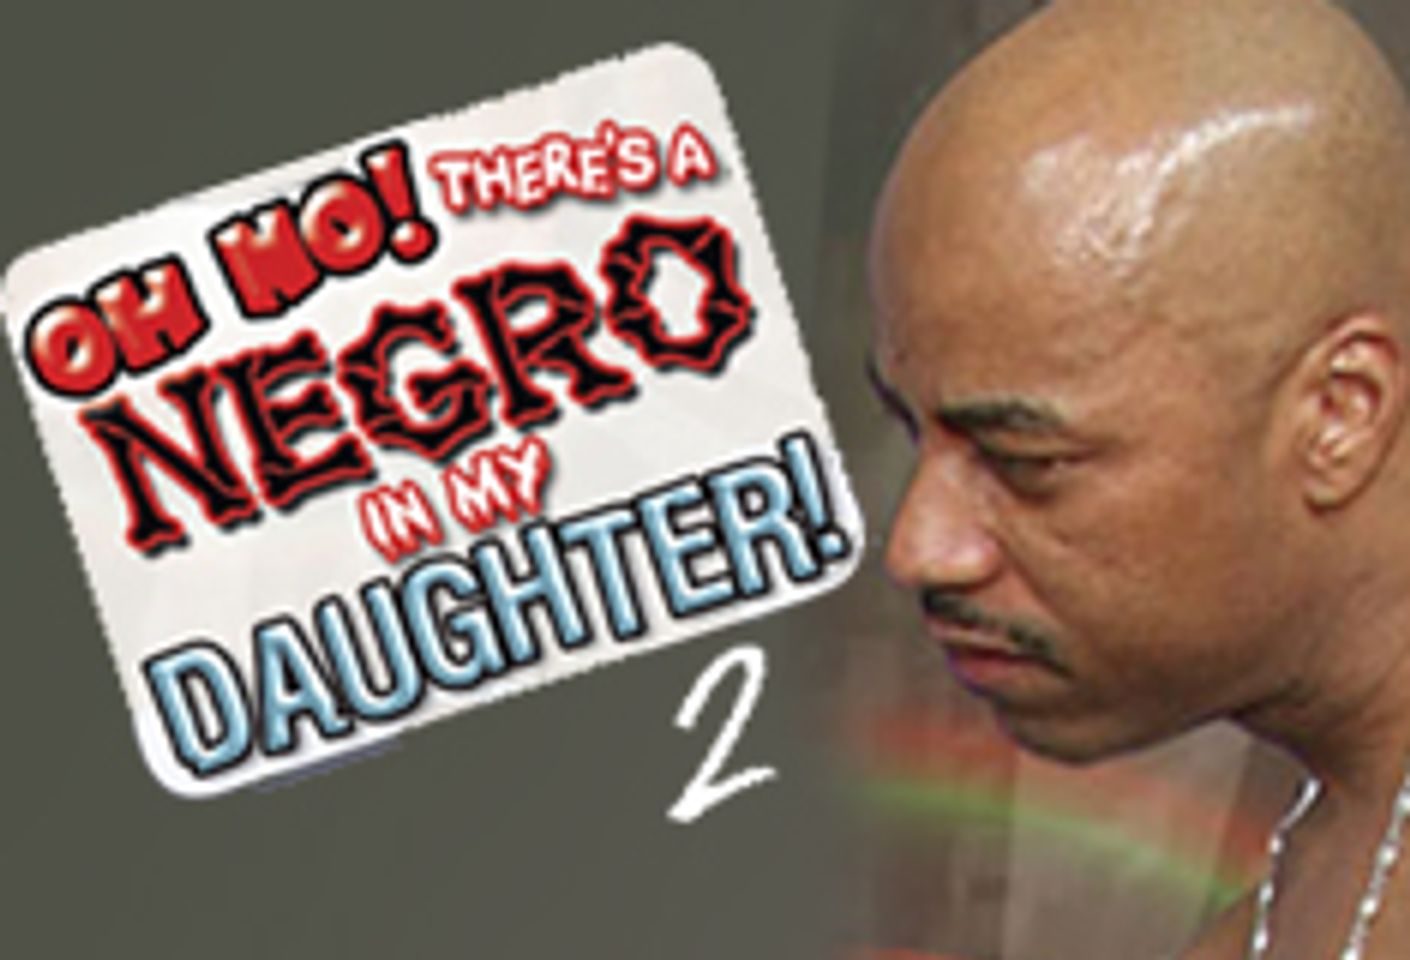 Chatsworth Pictures Ships 'Oh No! There's a Negro in My Daughter 2'